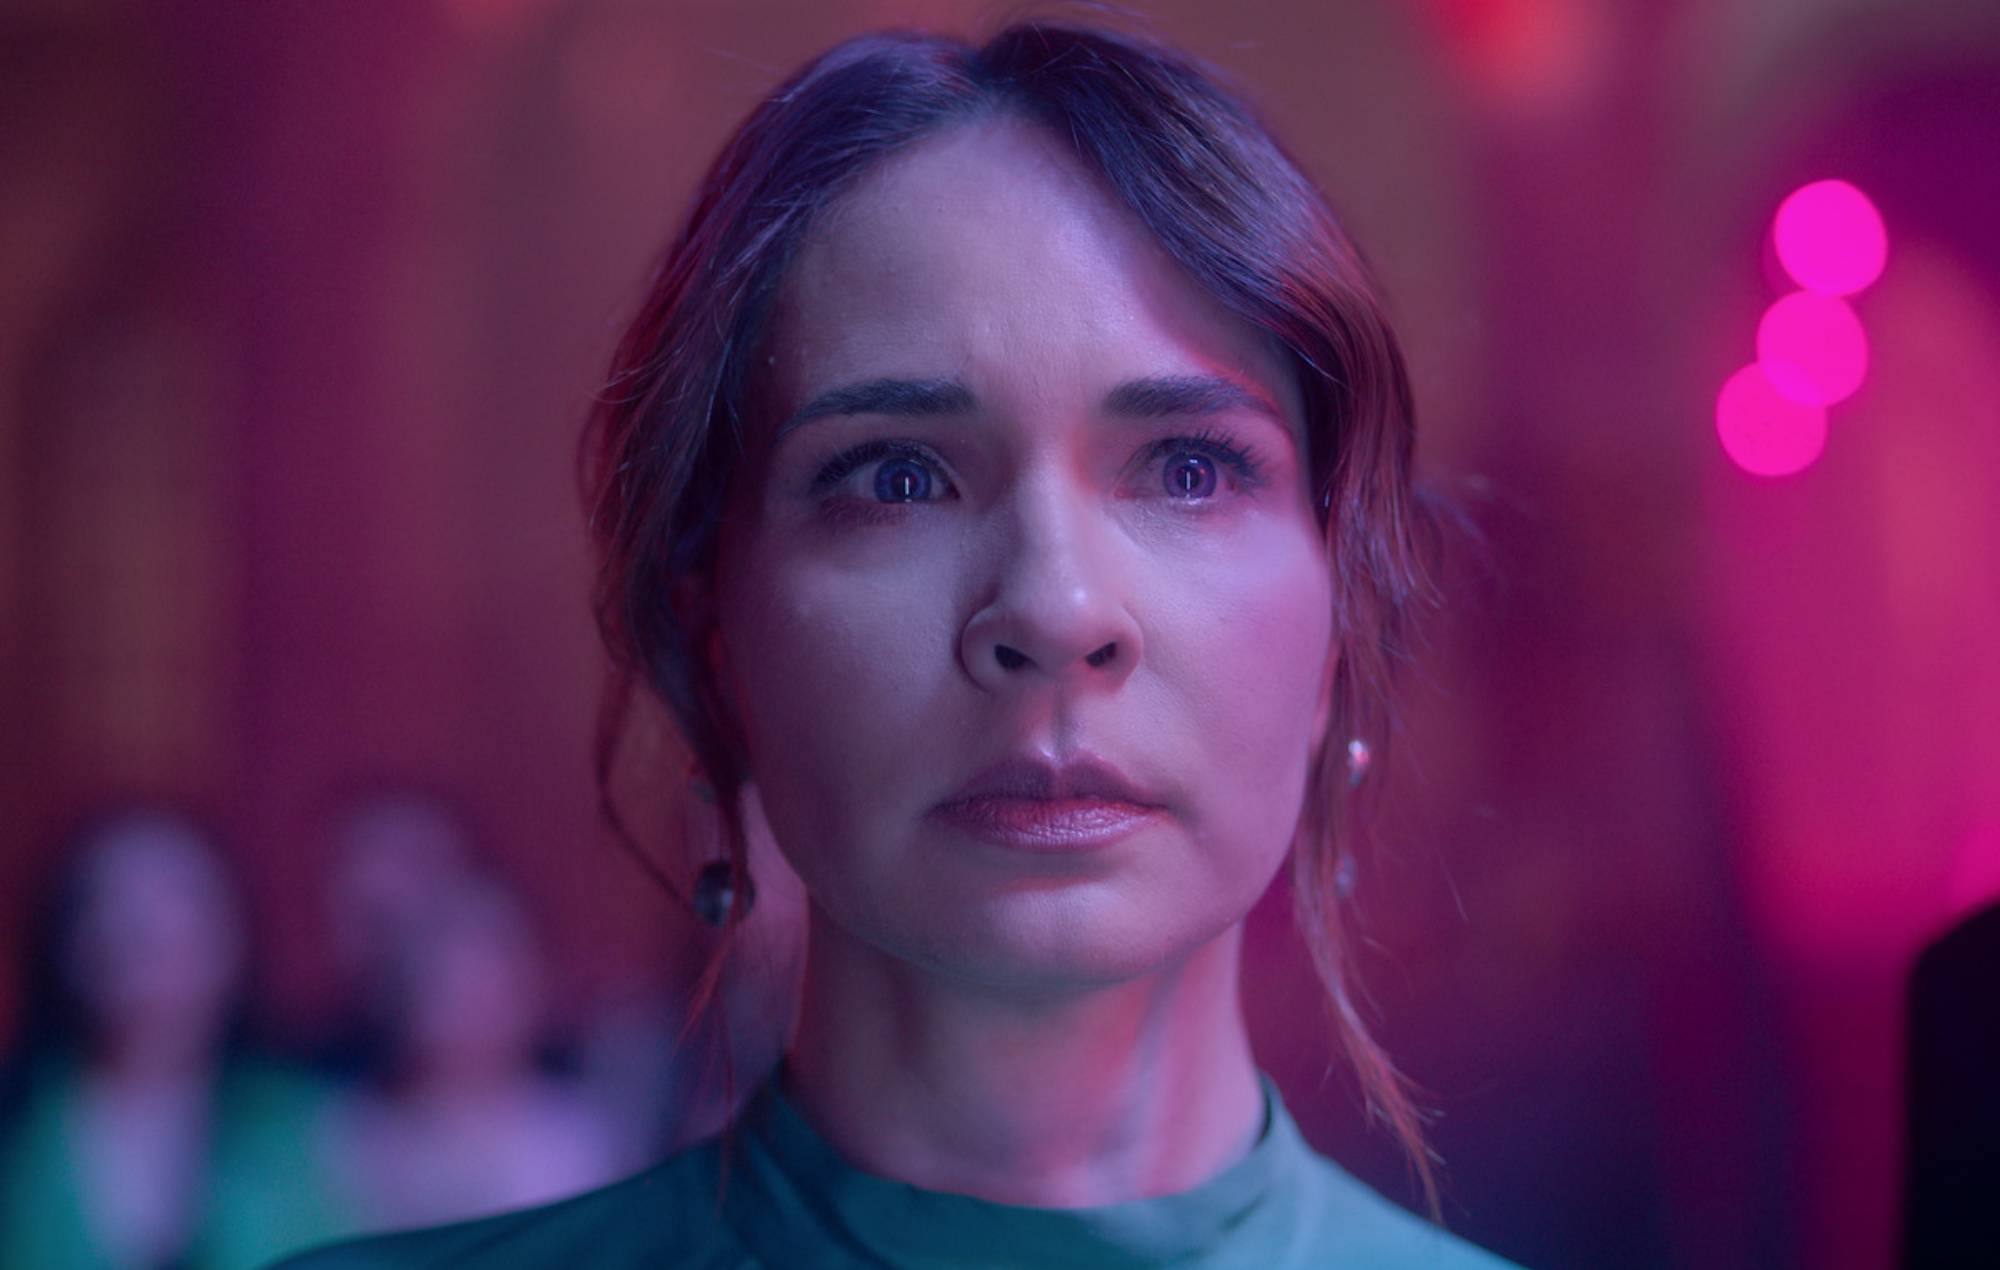 Netflix viewers “can’t get enough” of this new Mexican thriller series